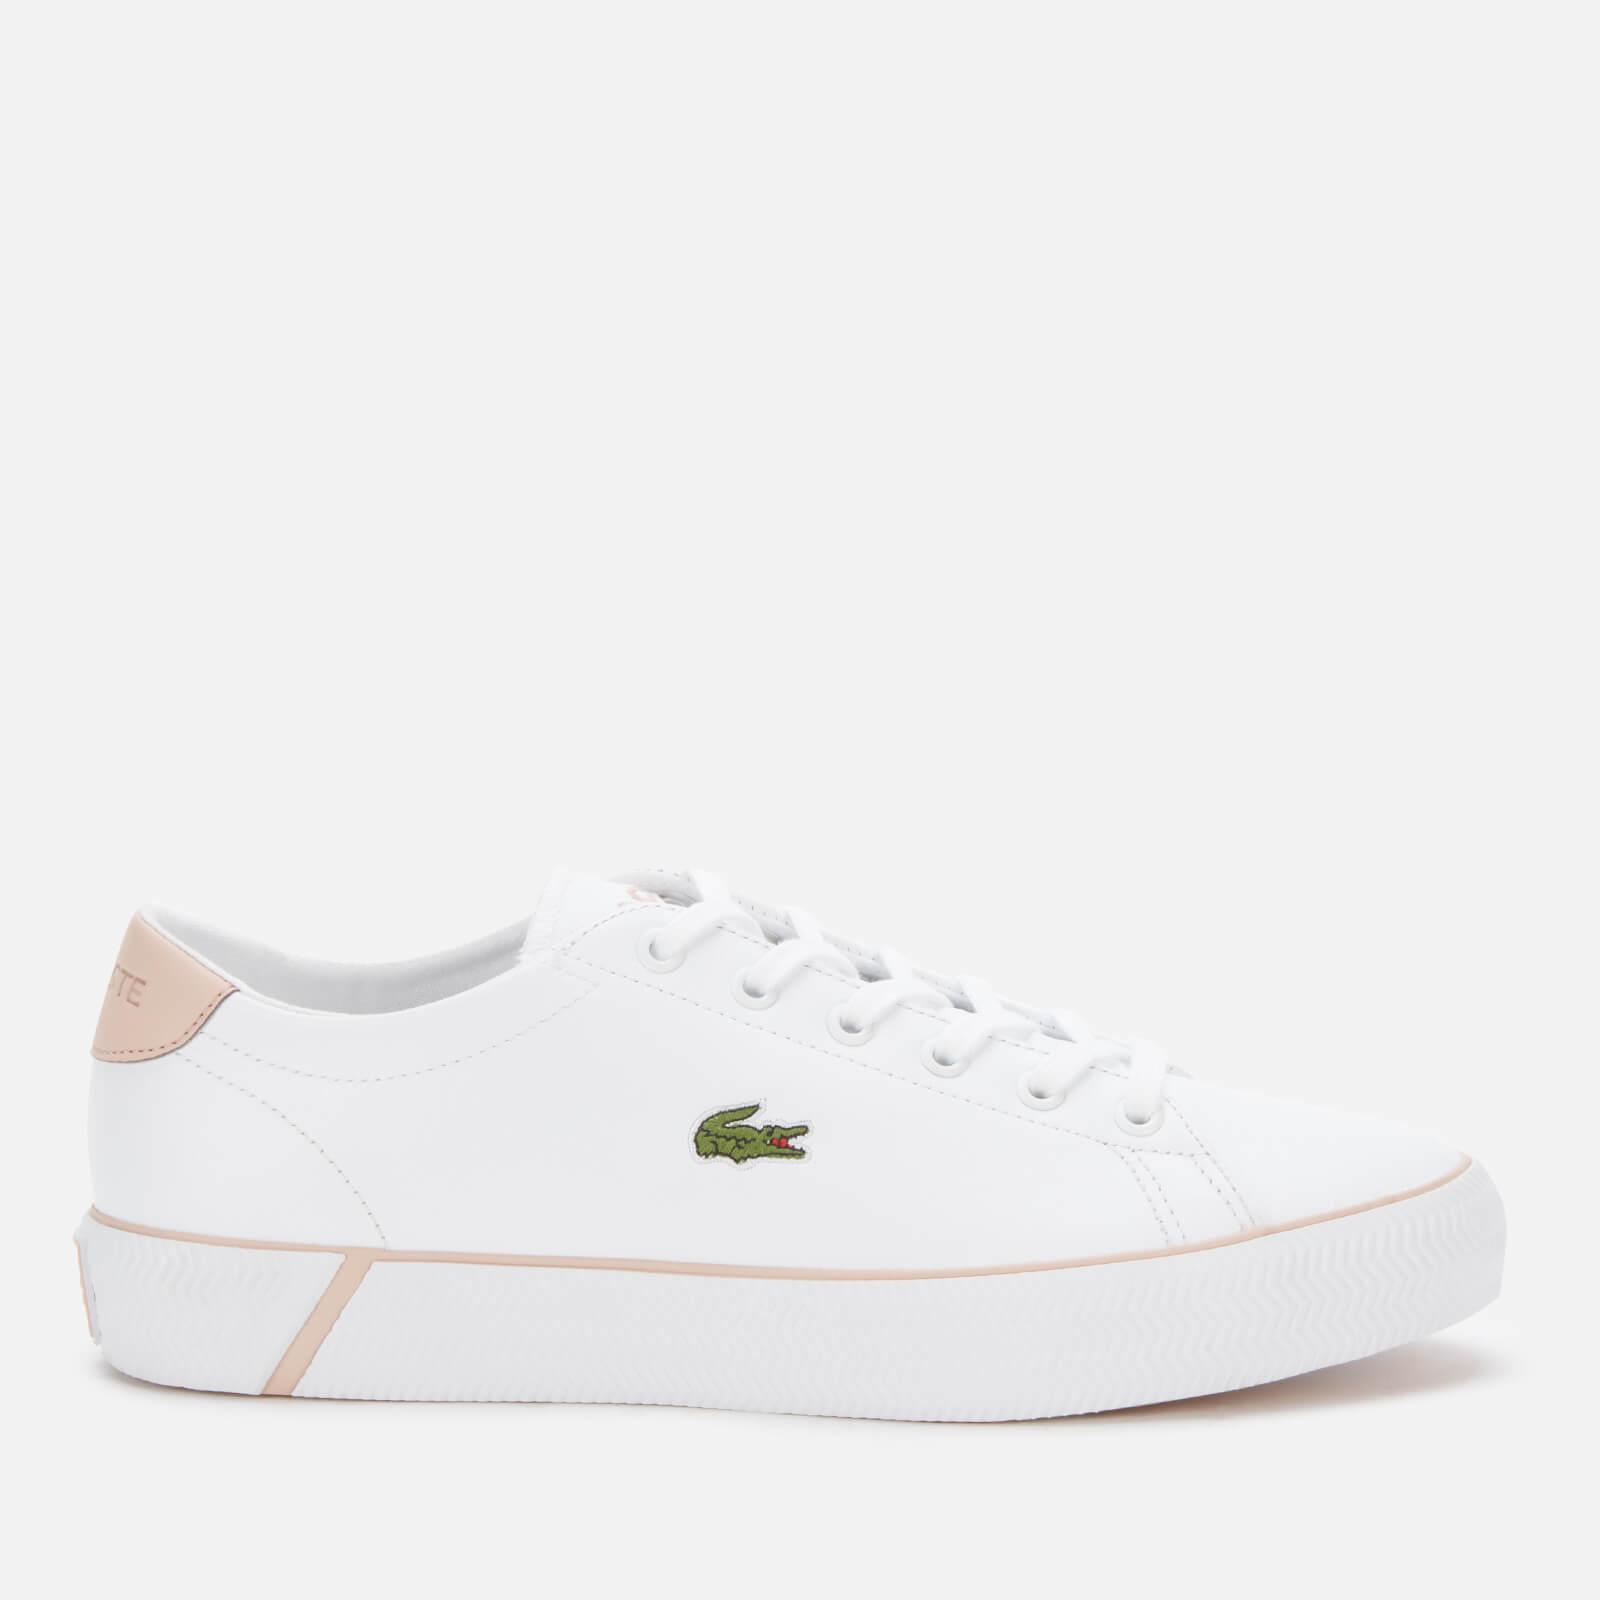 Lacoste Gripshot Bl 21 1 Leather Vulcanised Trainers in White | Lyst UK